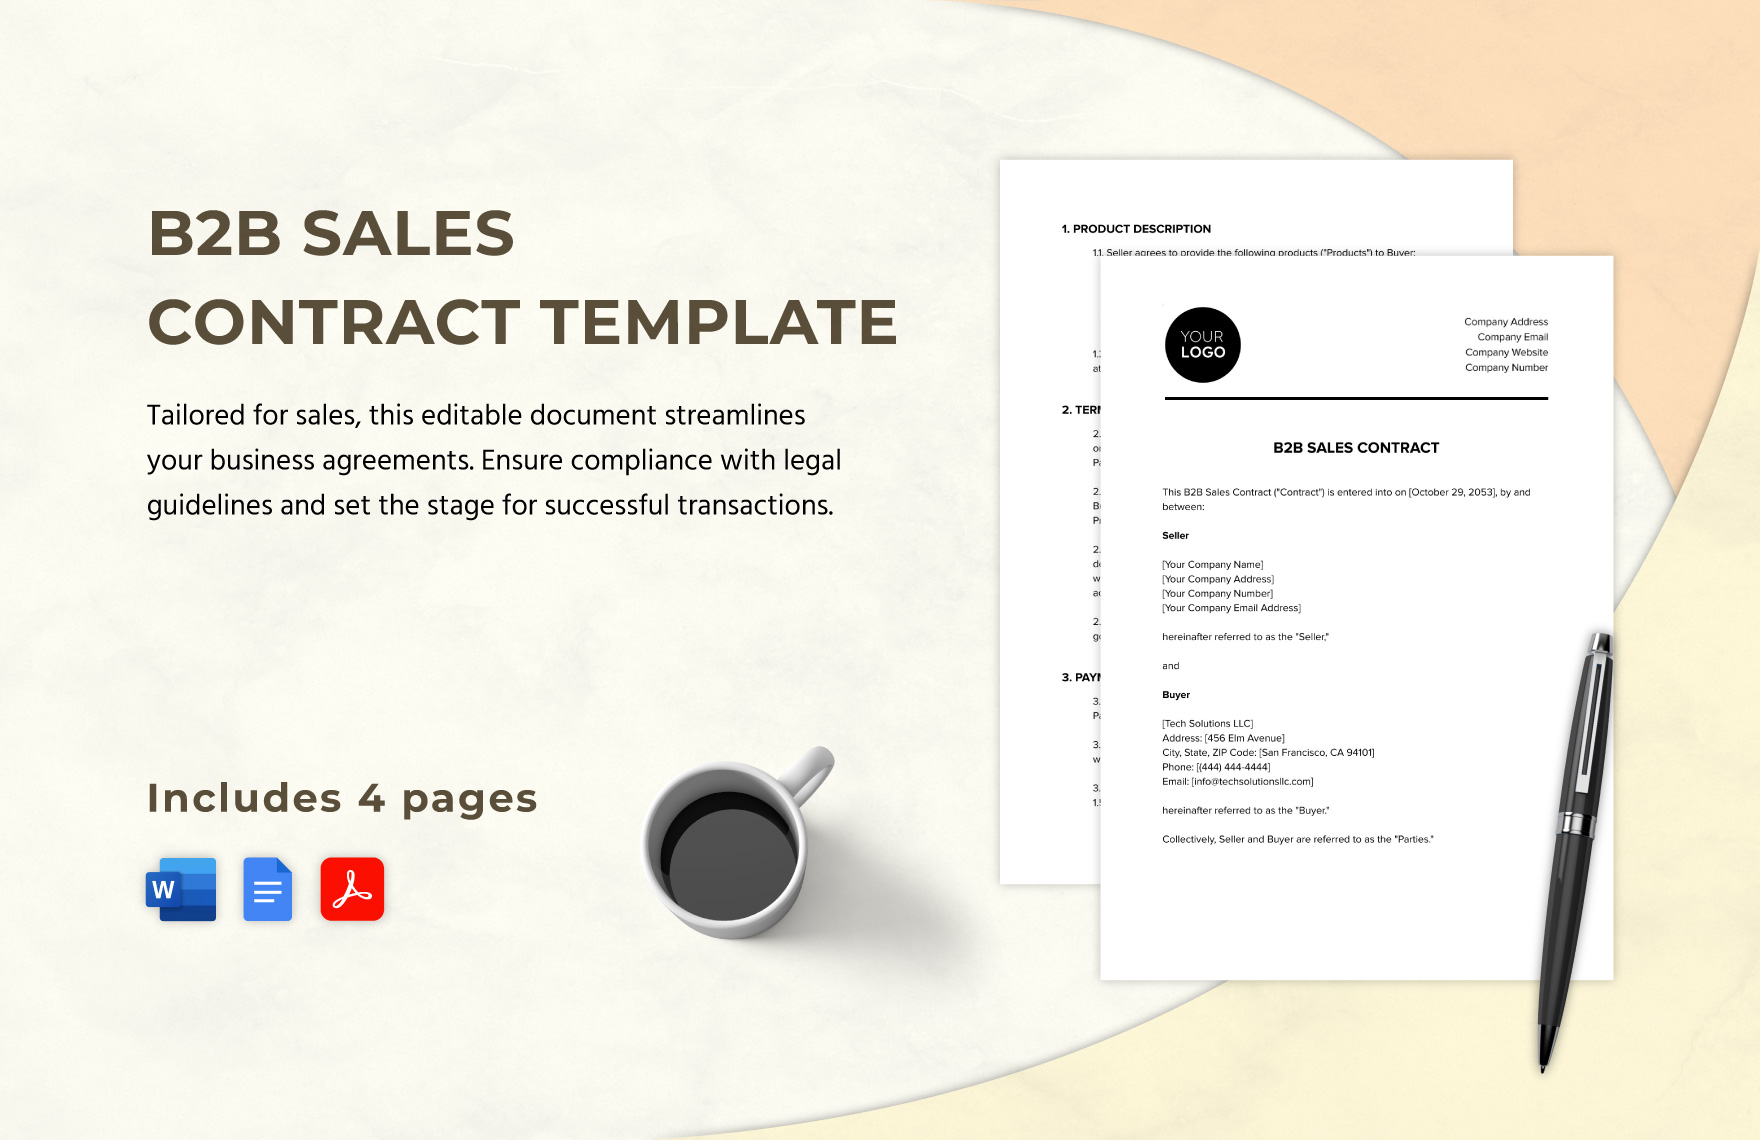 B2B Sales Contract Template